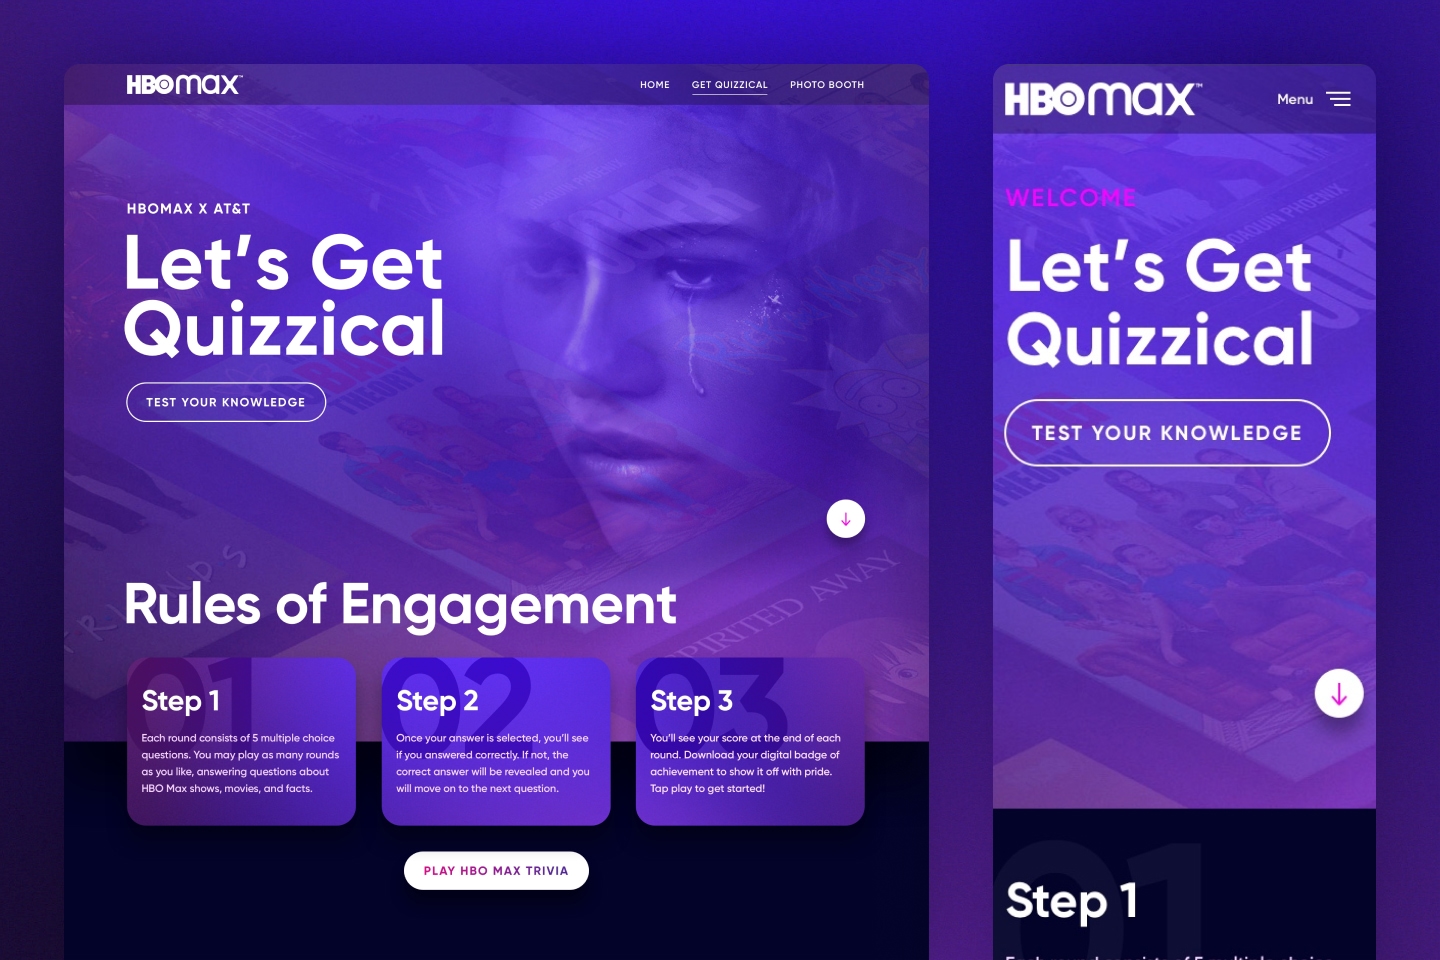 Screenshots of the desktop and mobile layouts of the HBO Max Trivia Landing Page